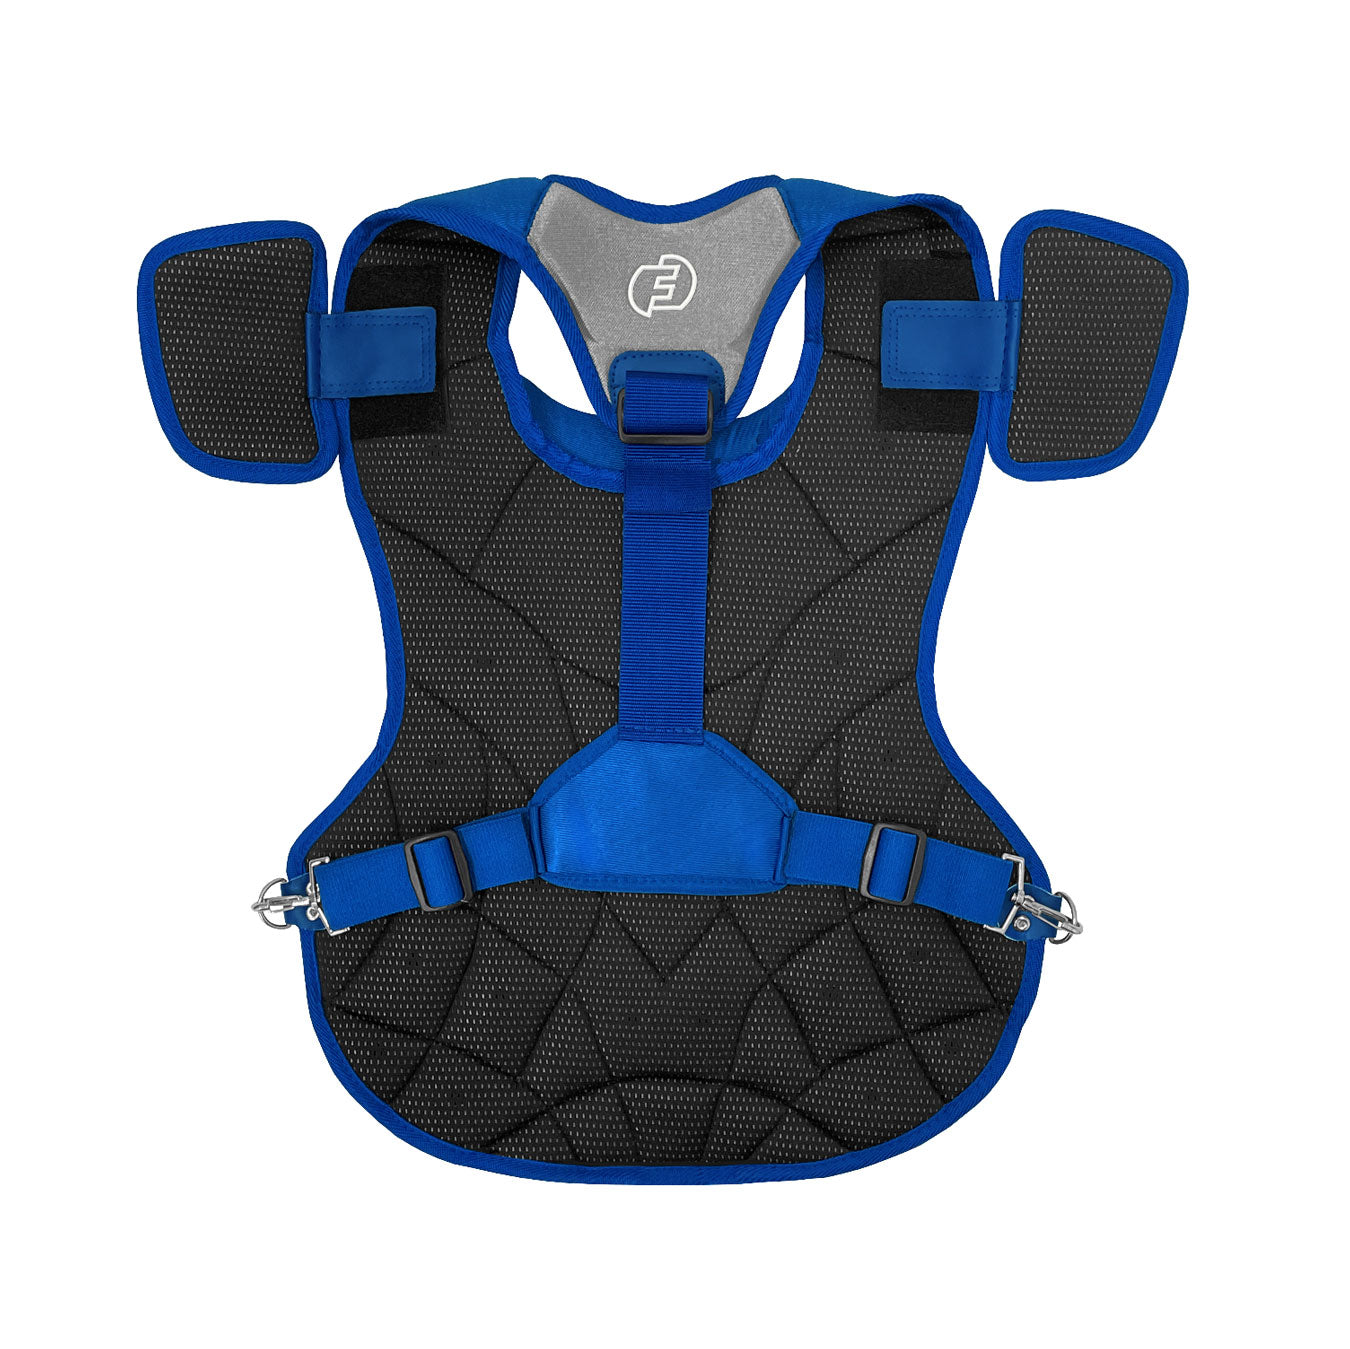 Force3 Catcher Pro Chest Protector with Dupont Kevlar Adult